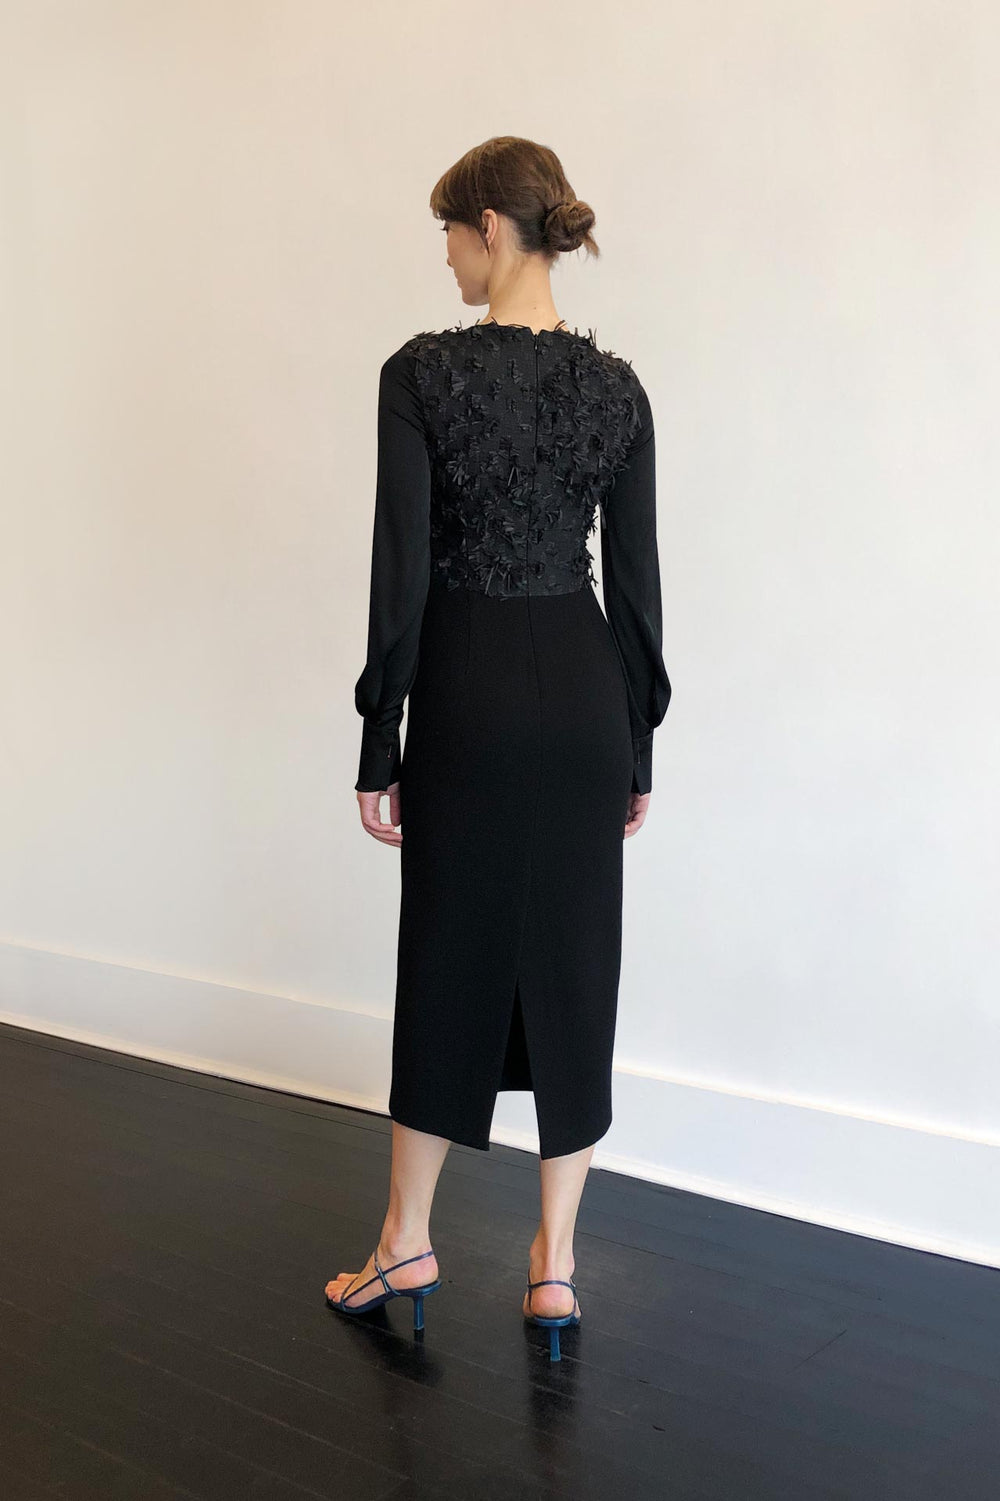 Fashion Designer CARL KAPP collection | Onyx structured cocktail dress with sleeves Black | Sydney Australia